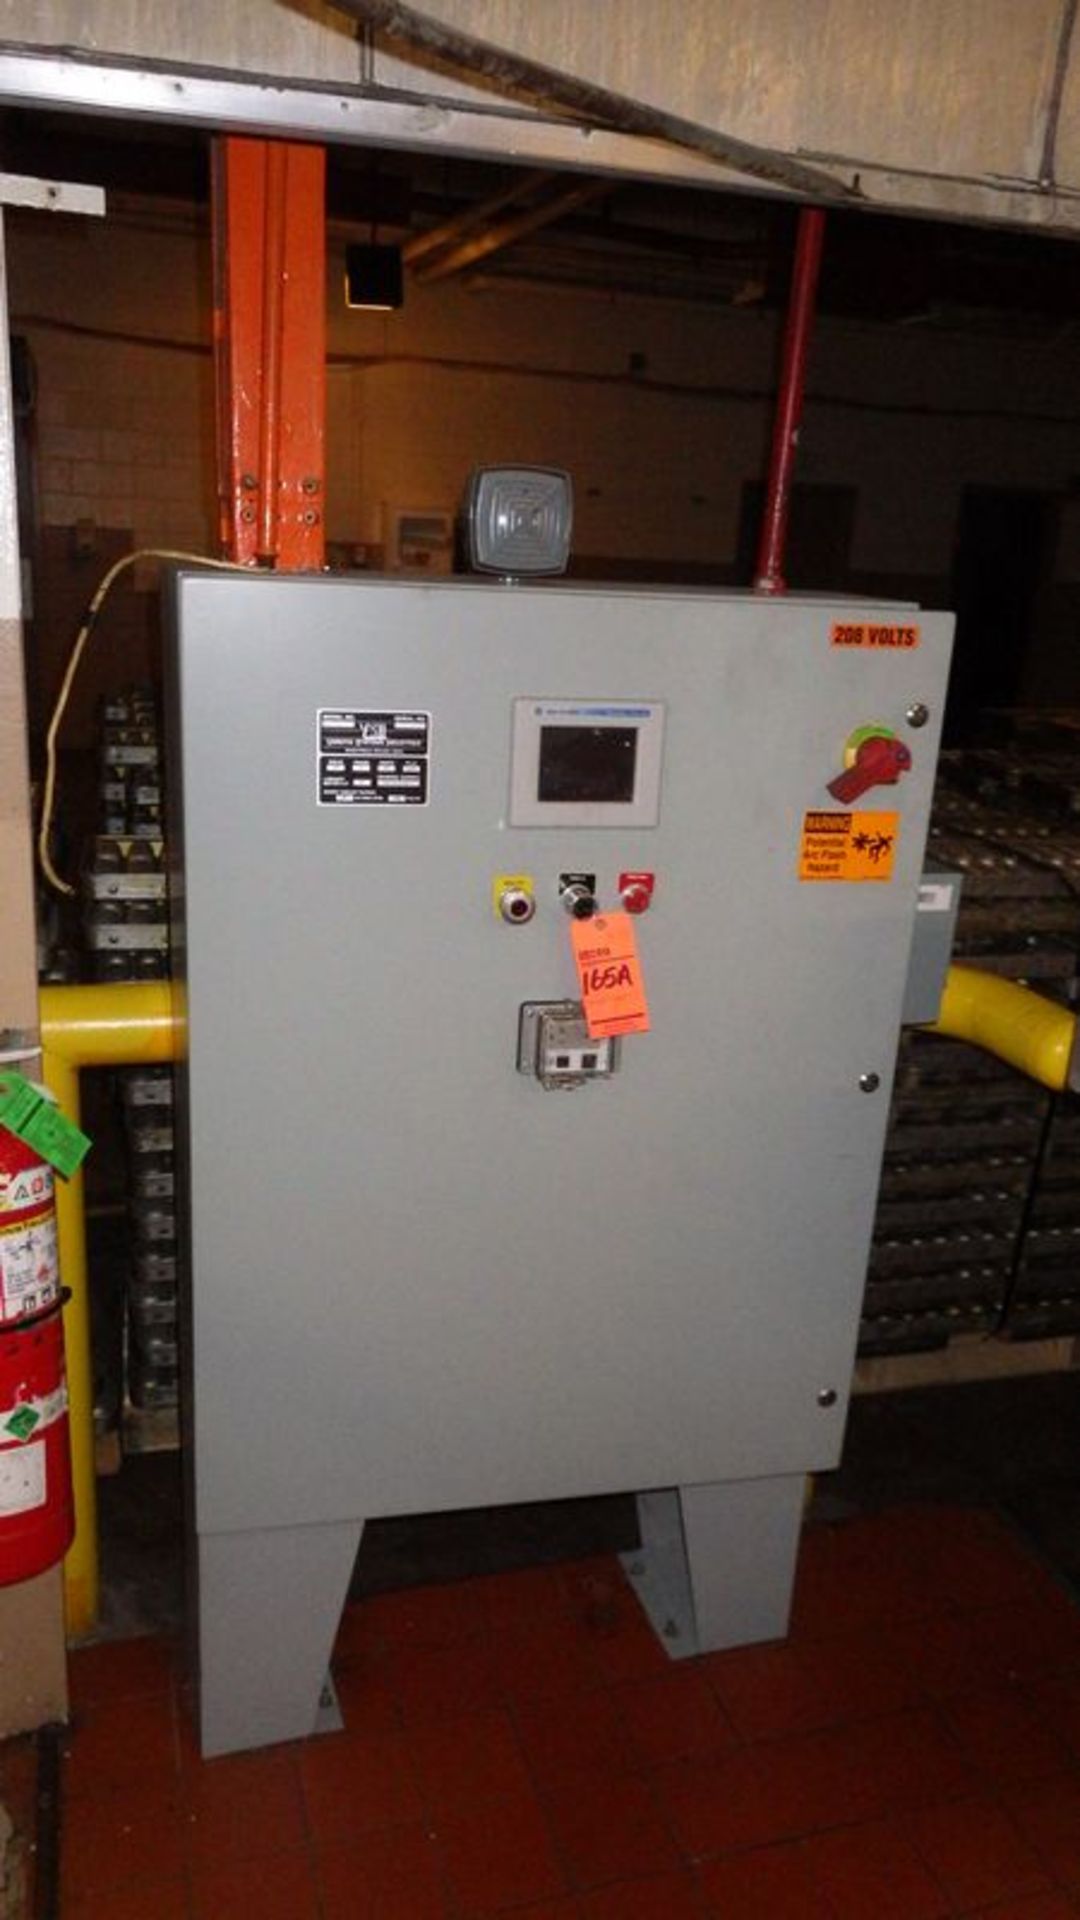 Control panel with Allen-Bradley Panelview 600, Micrologix 1400, and a Powerflex 40 (Subject to